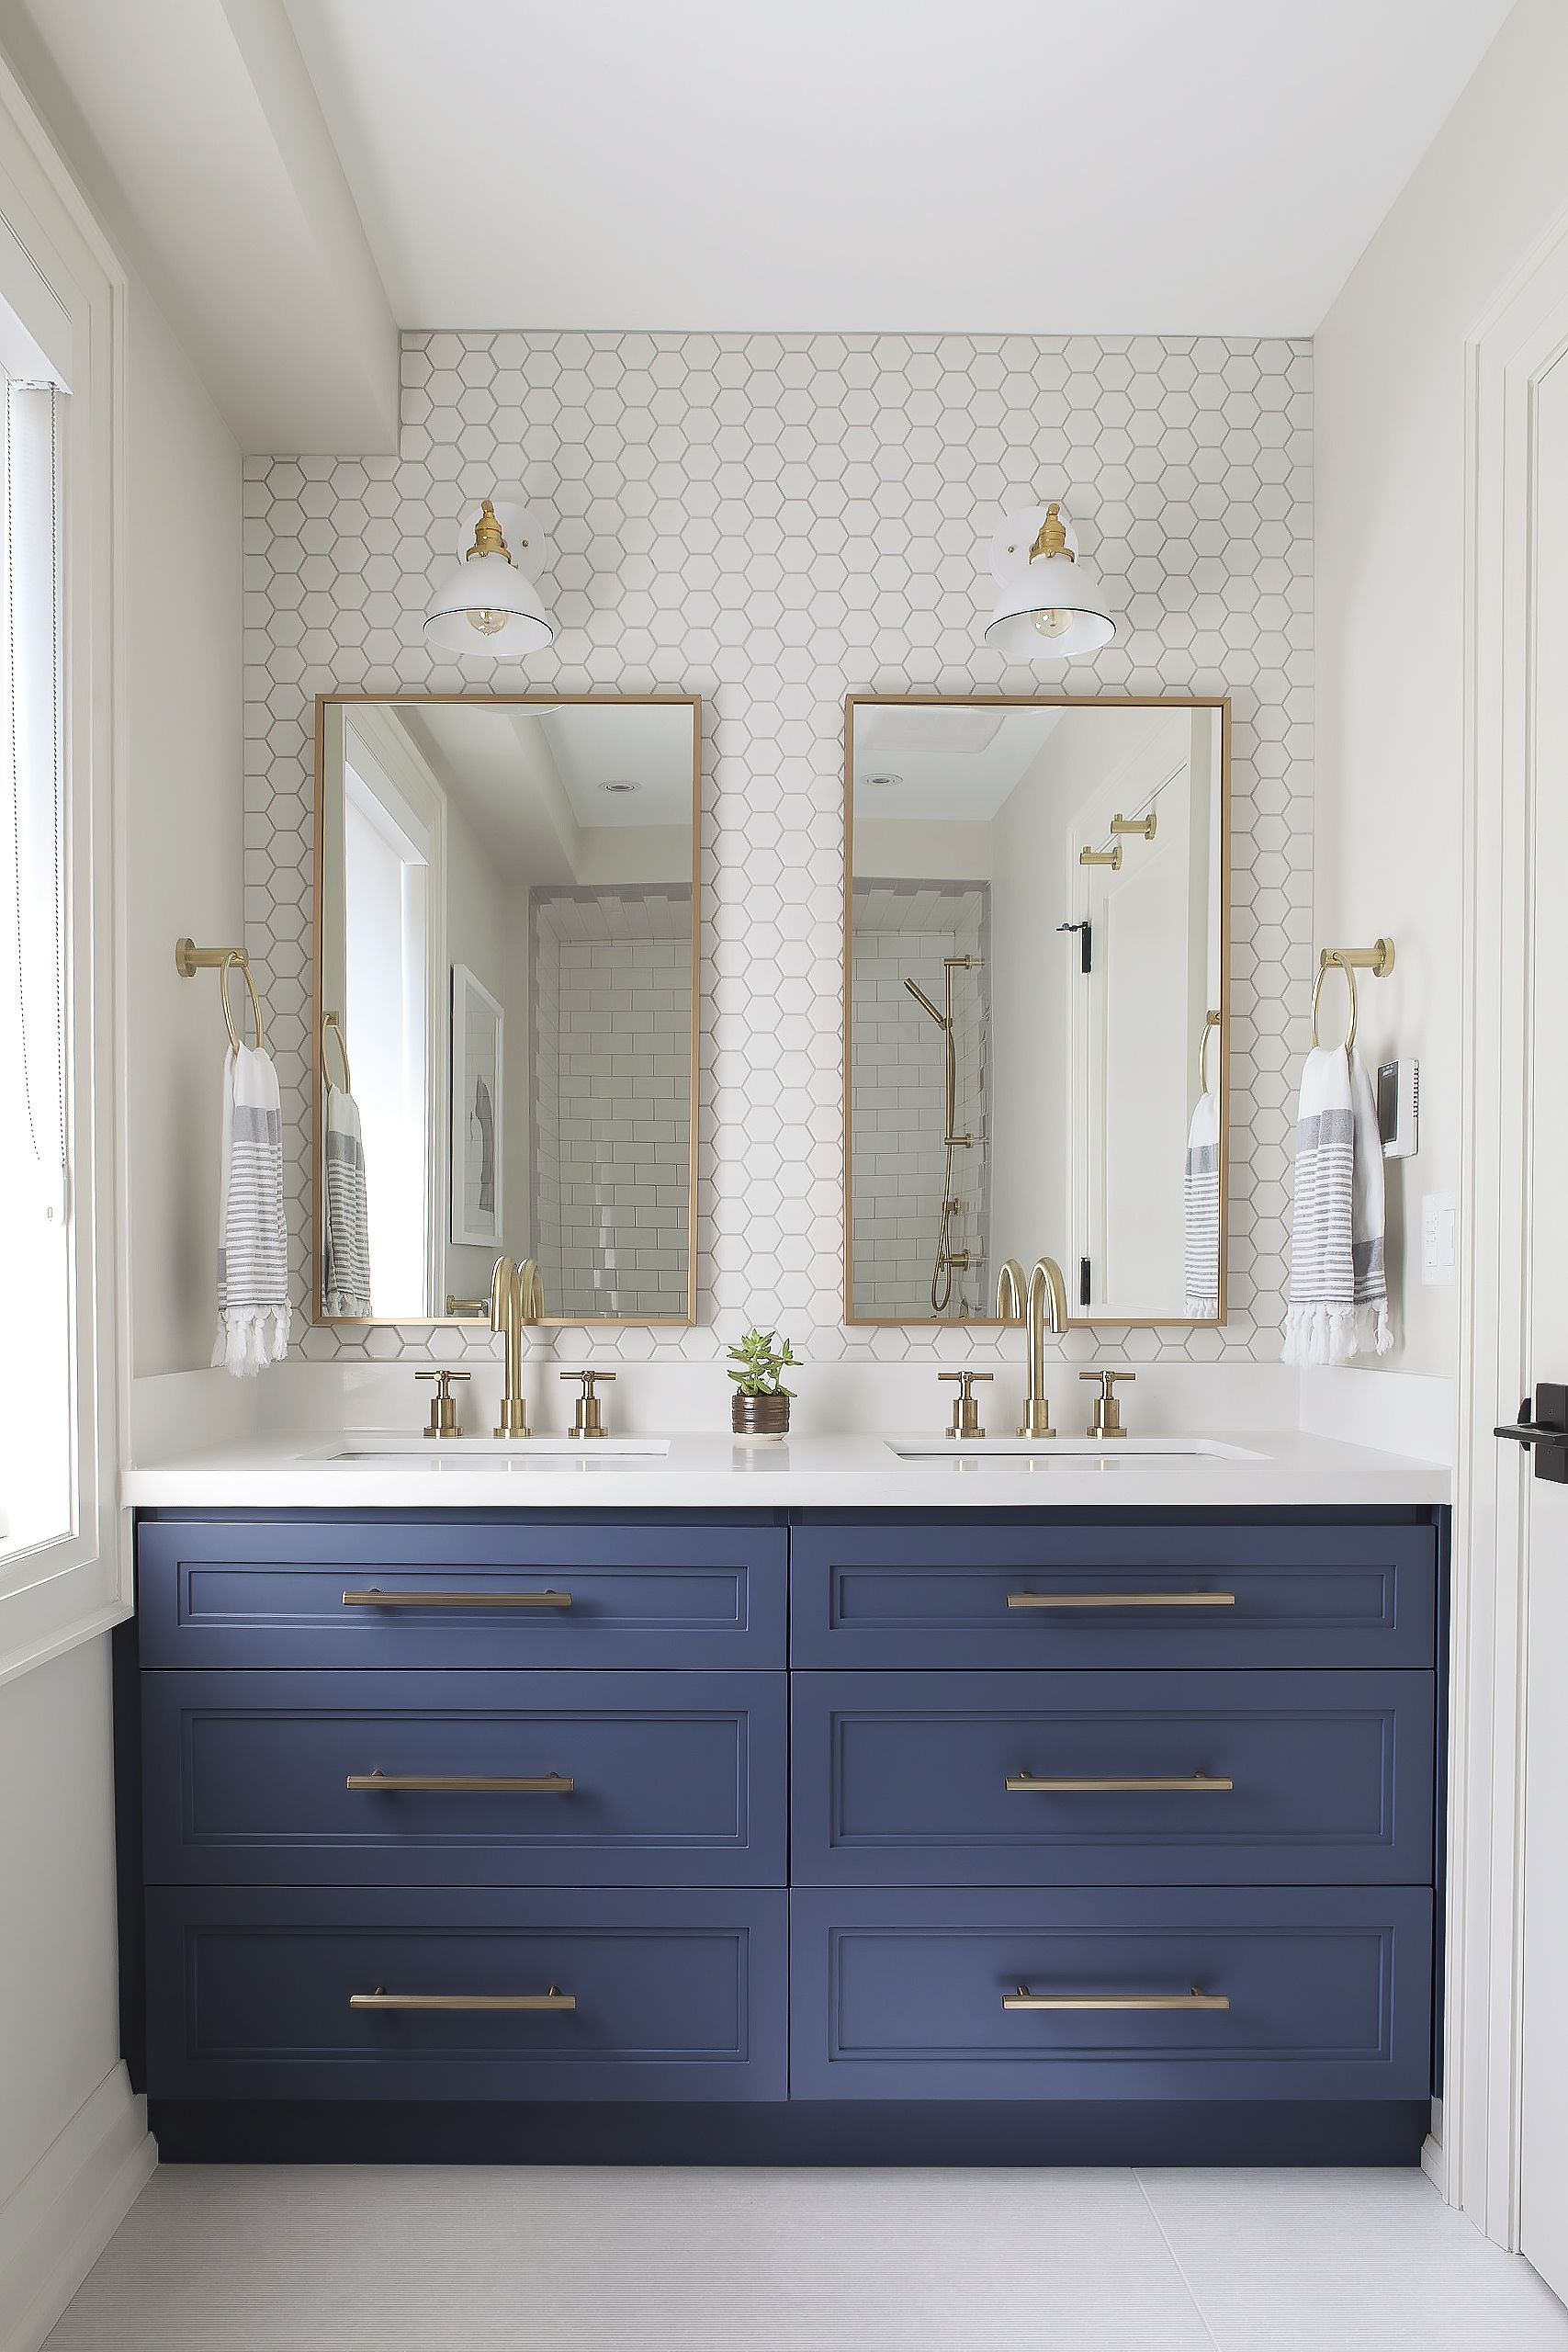 Deep blue painted cabinets in an otherwise all white bathroom